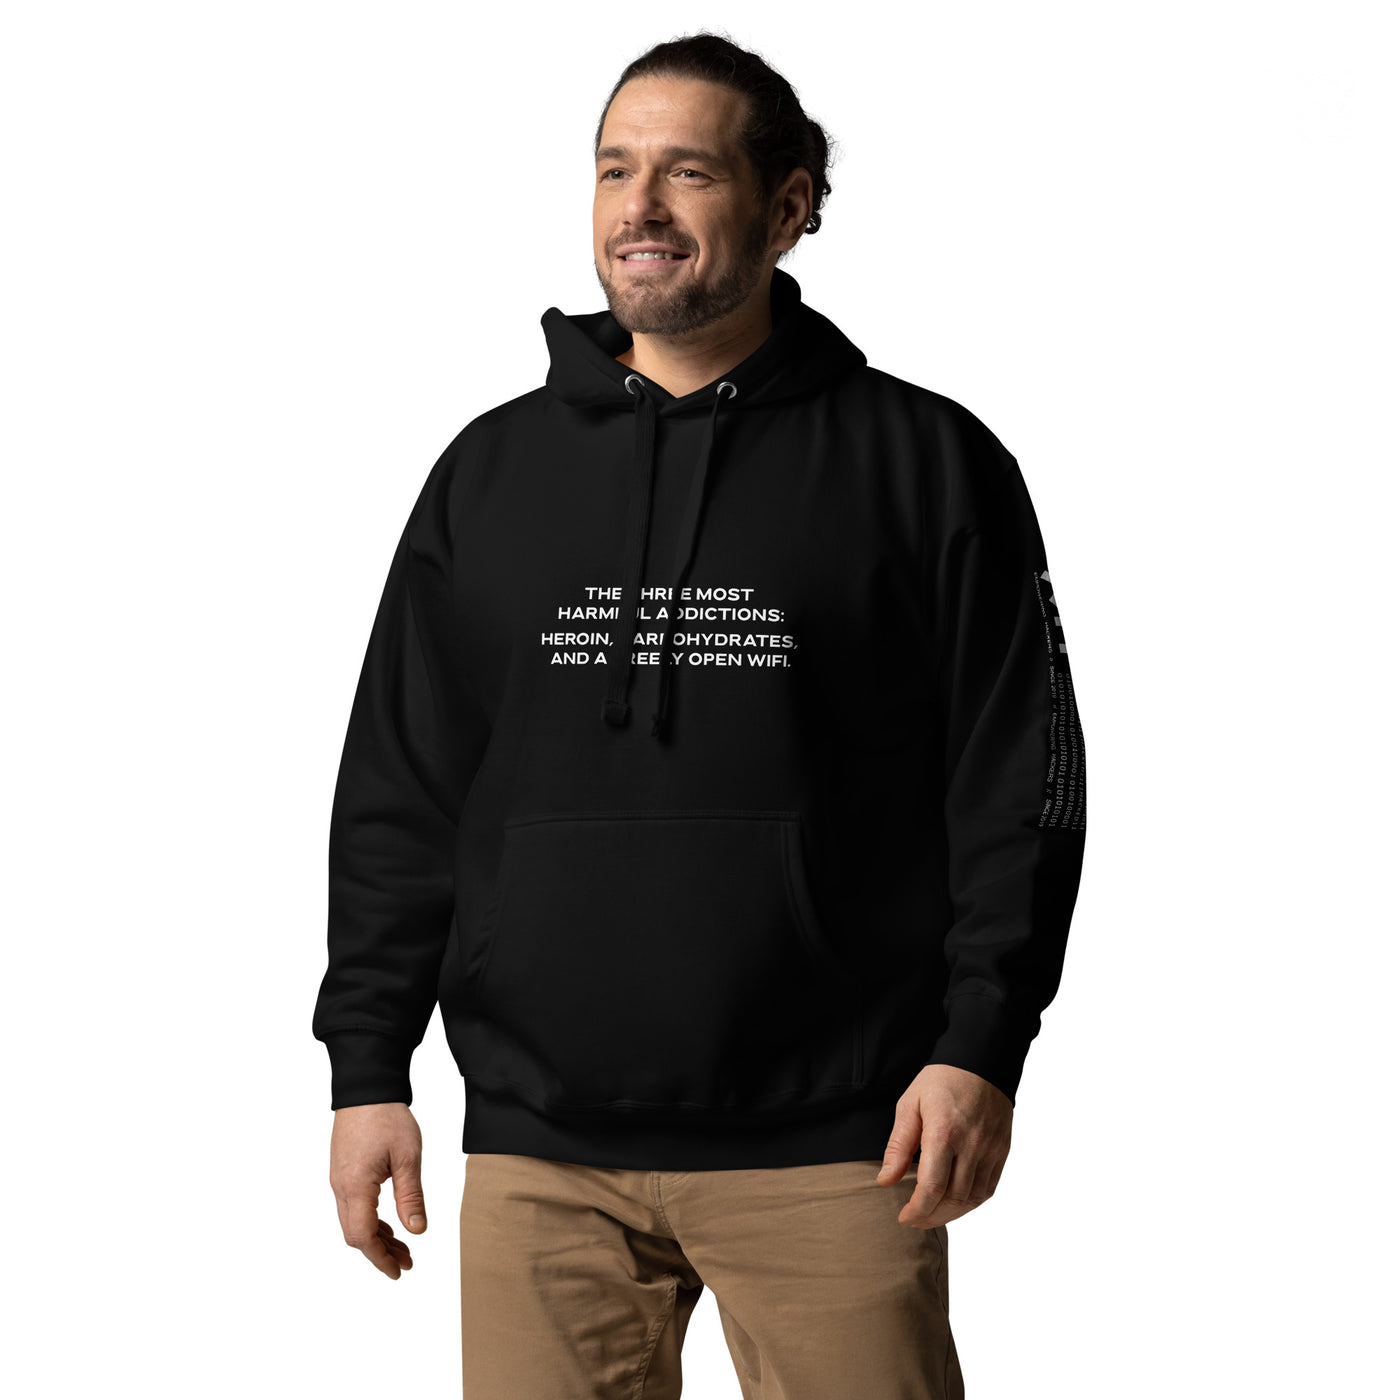 The three most harmful addictions heroin, carbohydrates and a freely open WiFi V2 - Unisex Hoodie